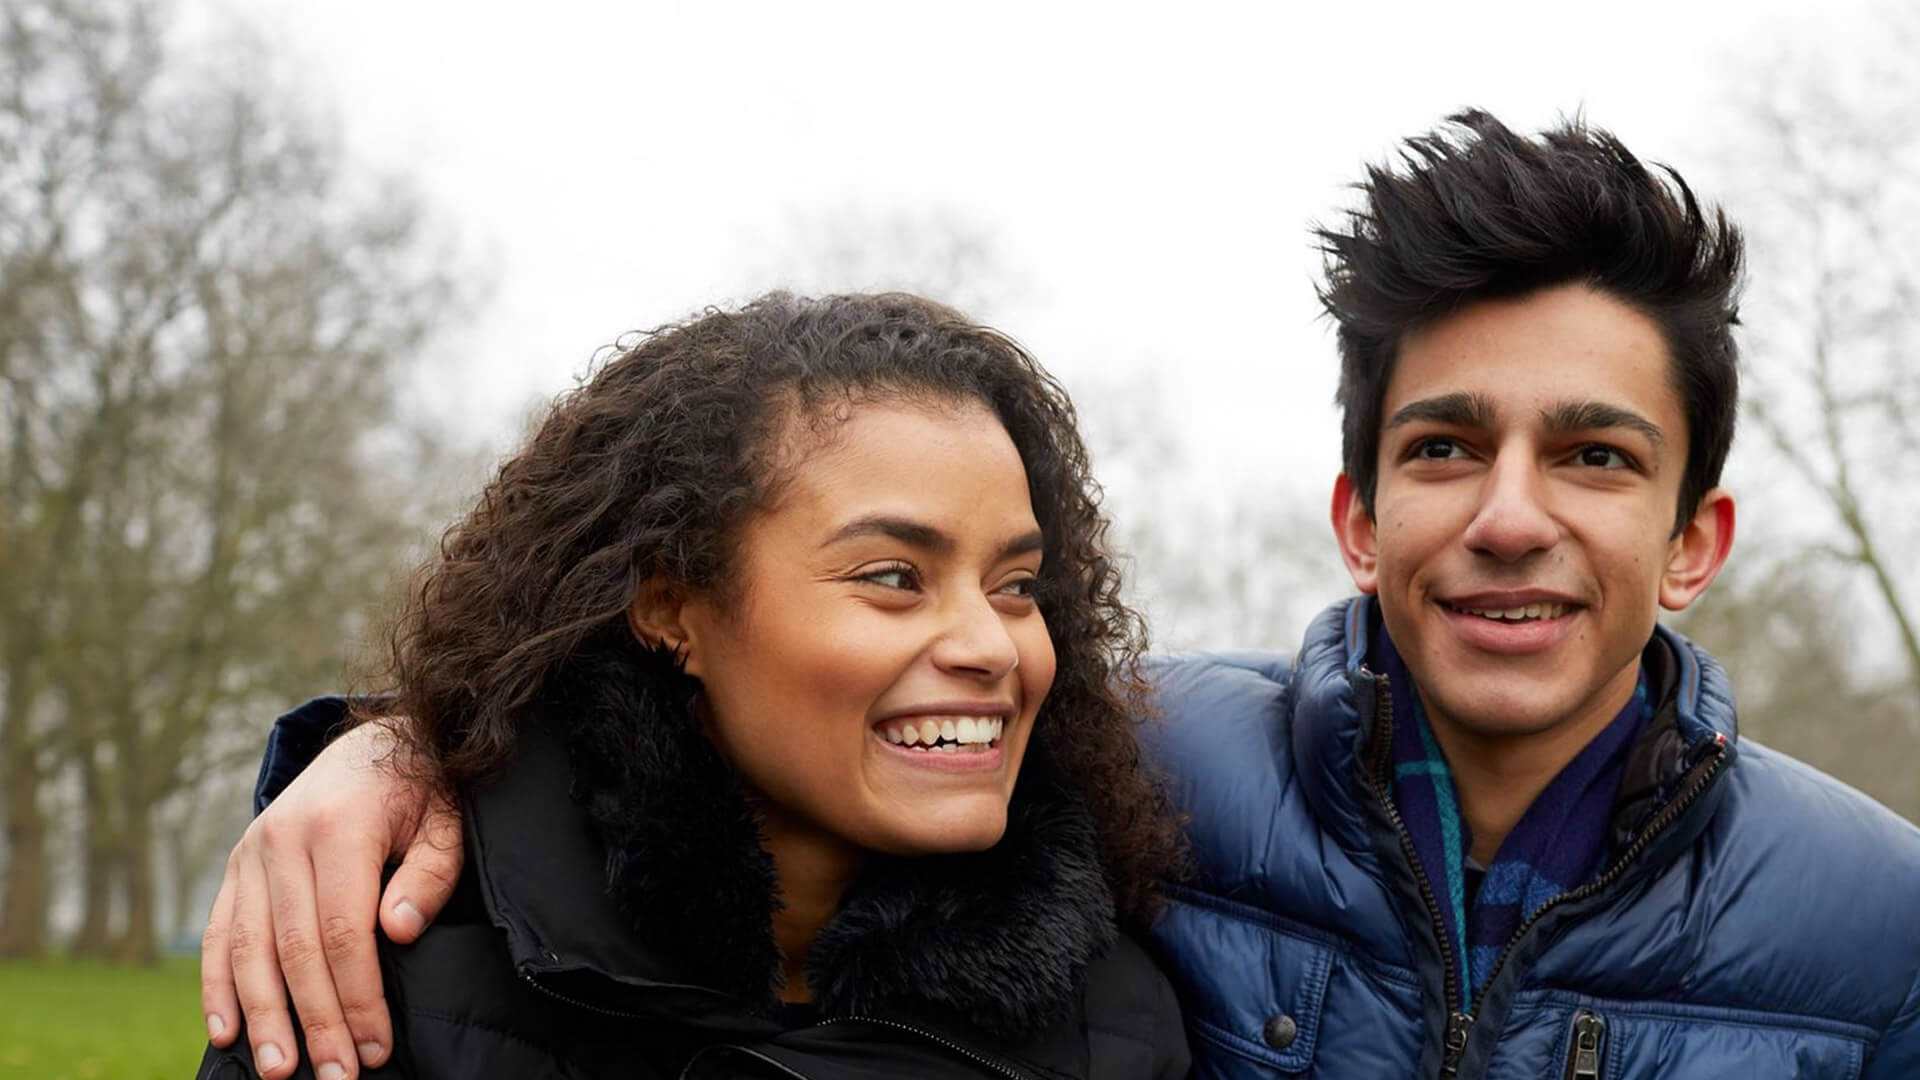 Two young people standing together and smiling, one has their arm around the shoulder of the other.